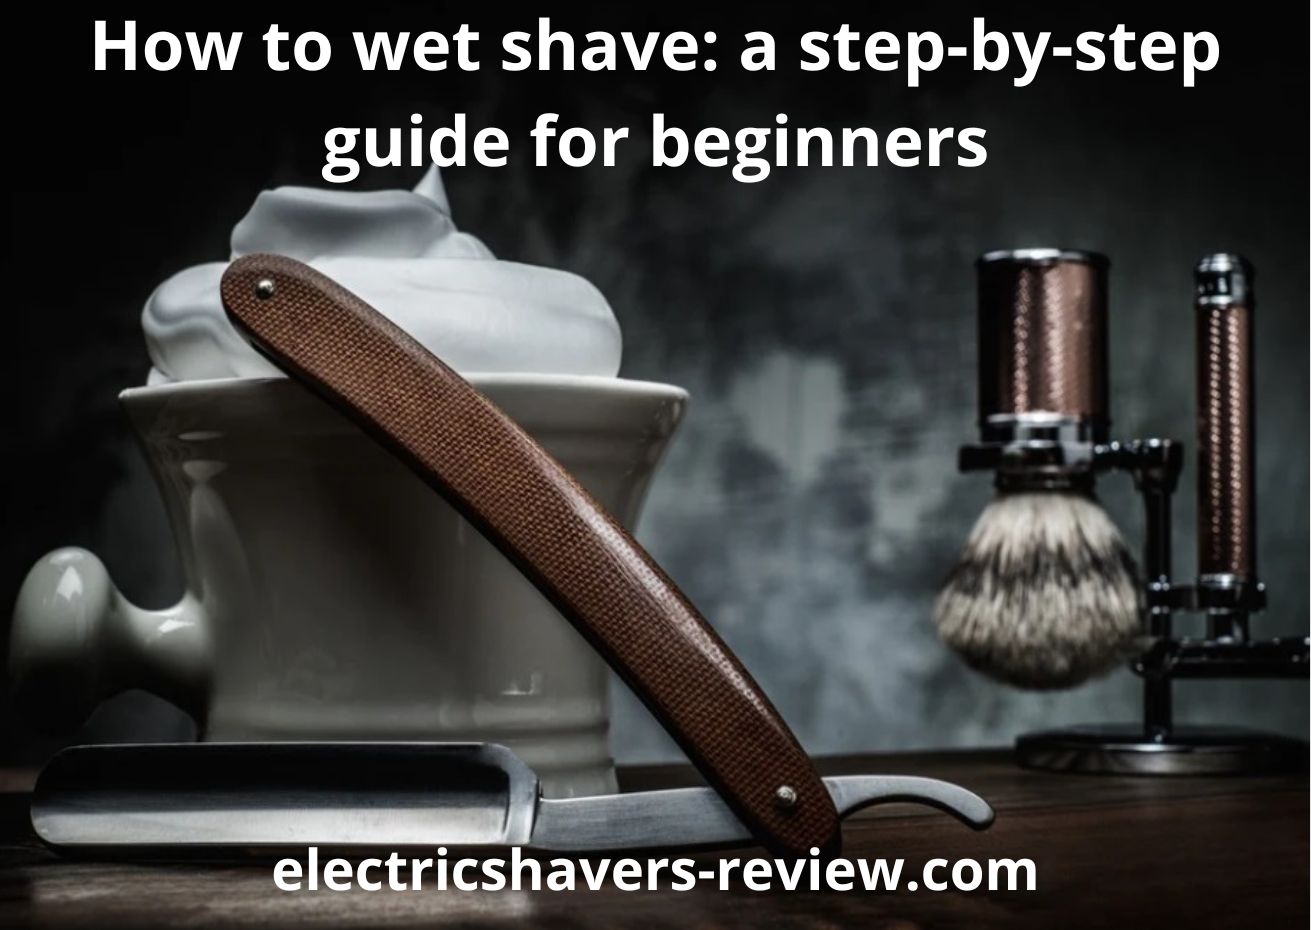 How to wet shave? The best step-by-step guide (20+ tips)